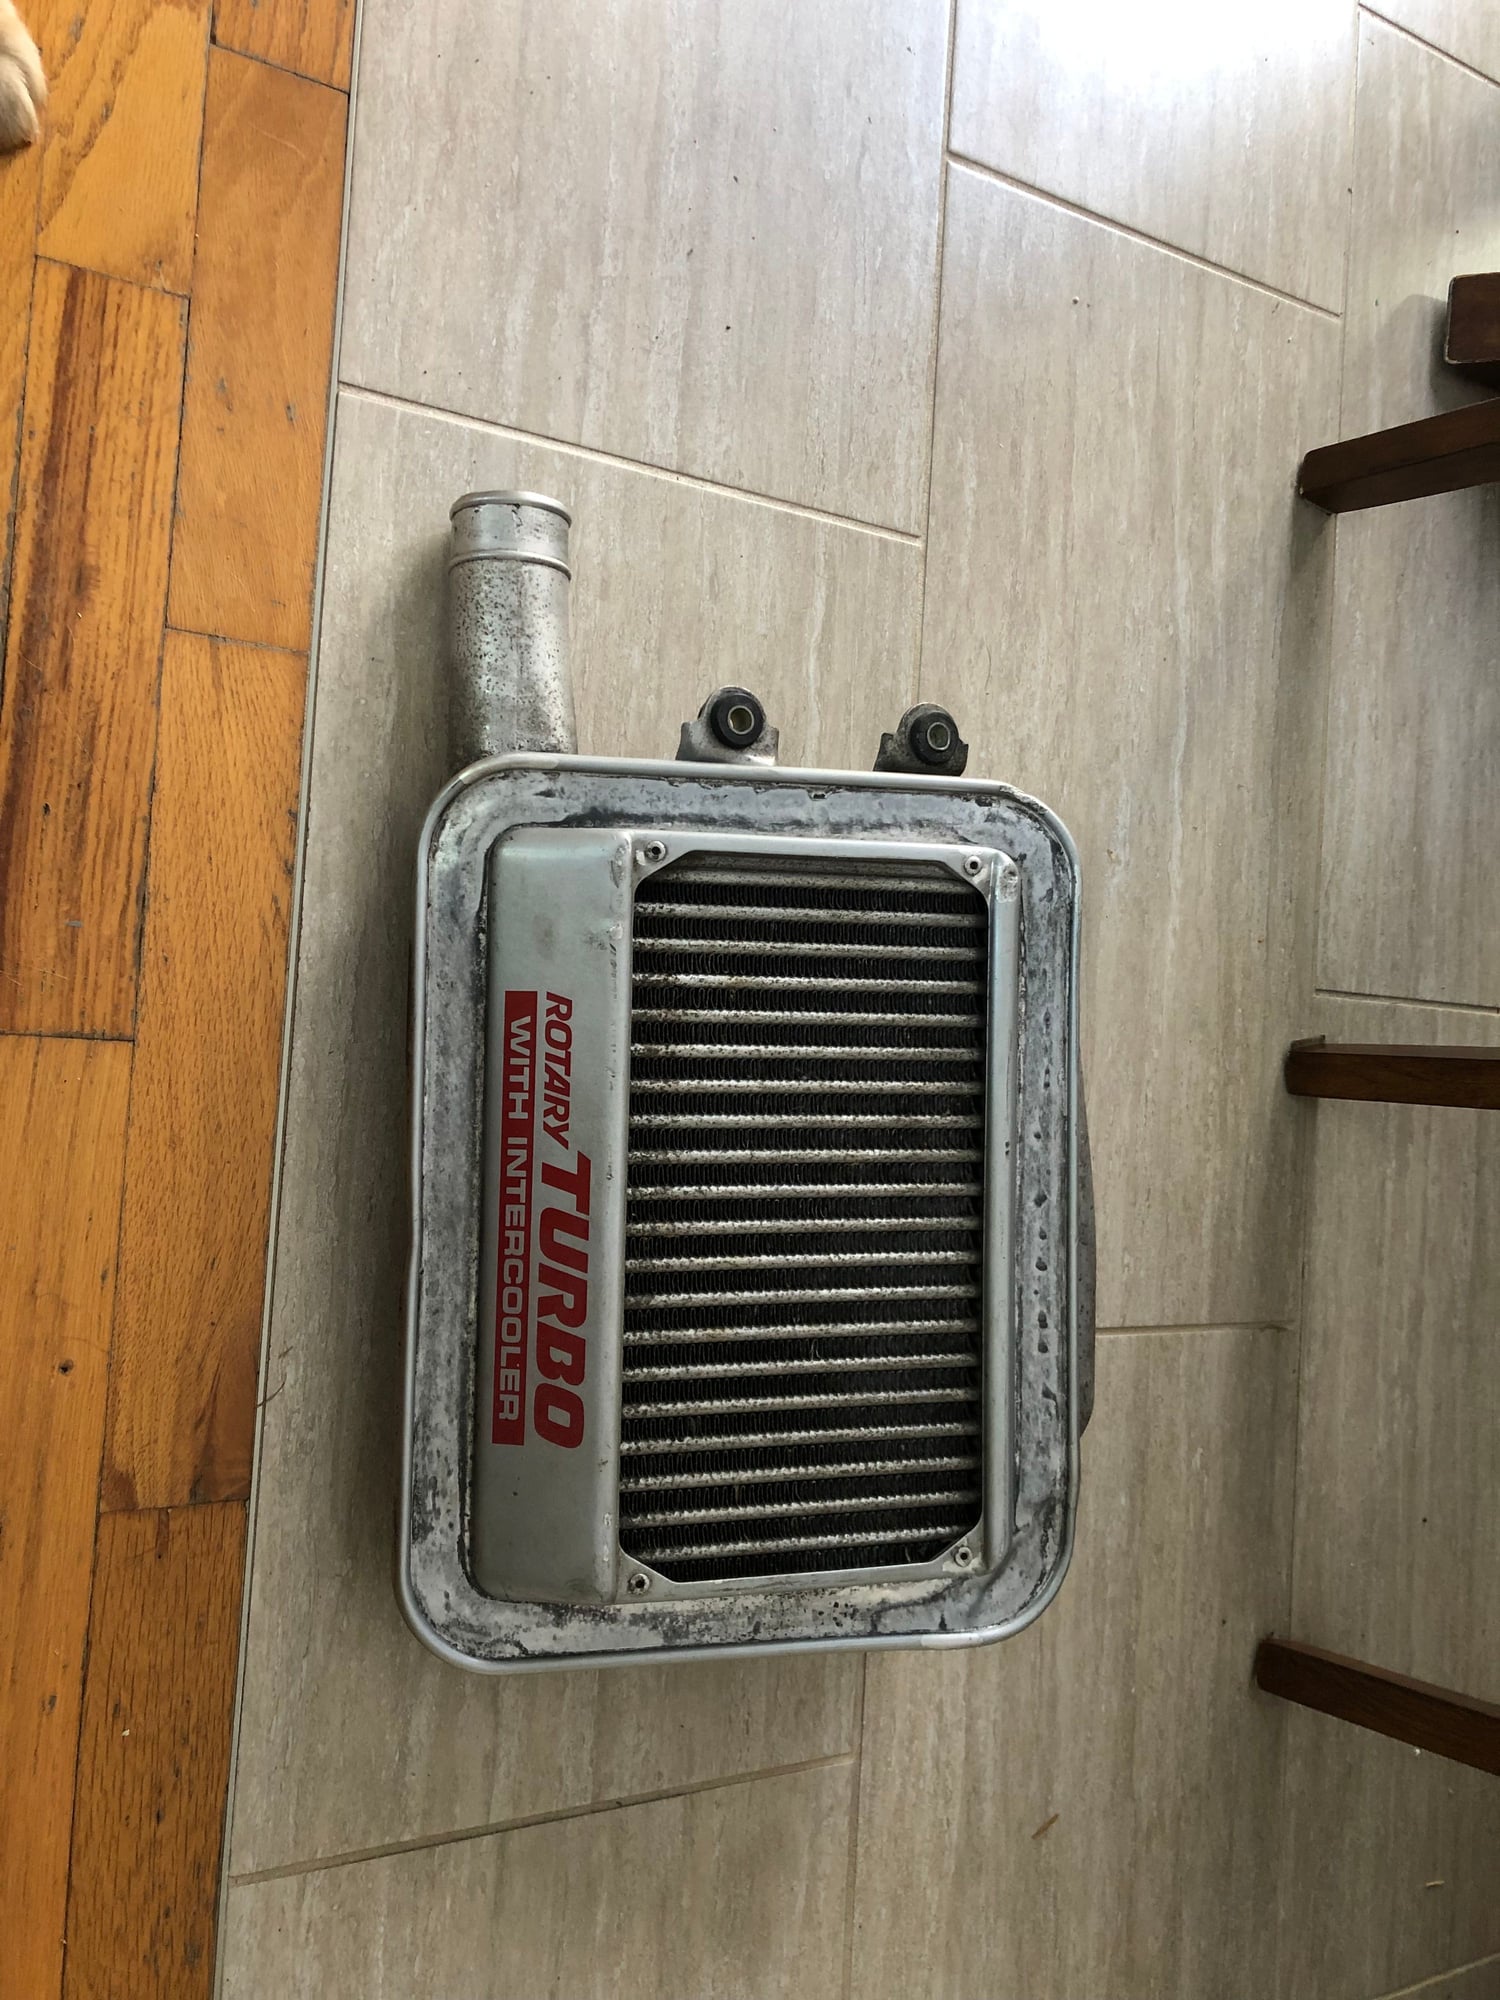 Engine - Intake/Fuel - Tii intercooler from s4 engine - Used - 1986 to 1991 Mazda RX-7 - Alfred, ON K0B1A0, Canada